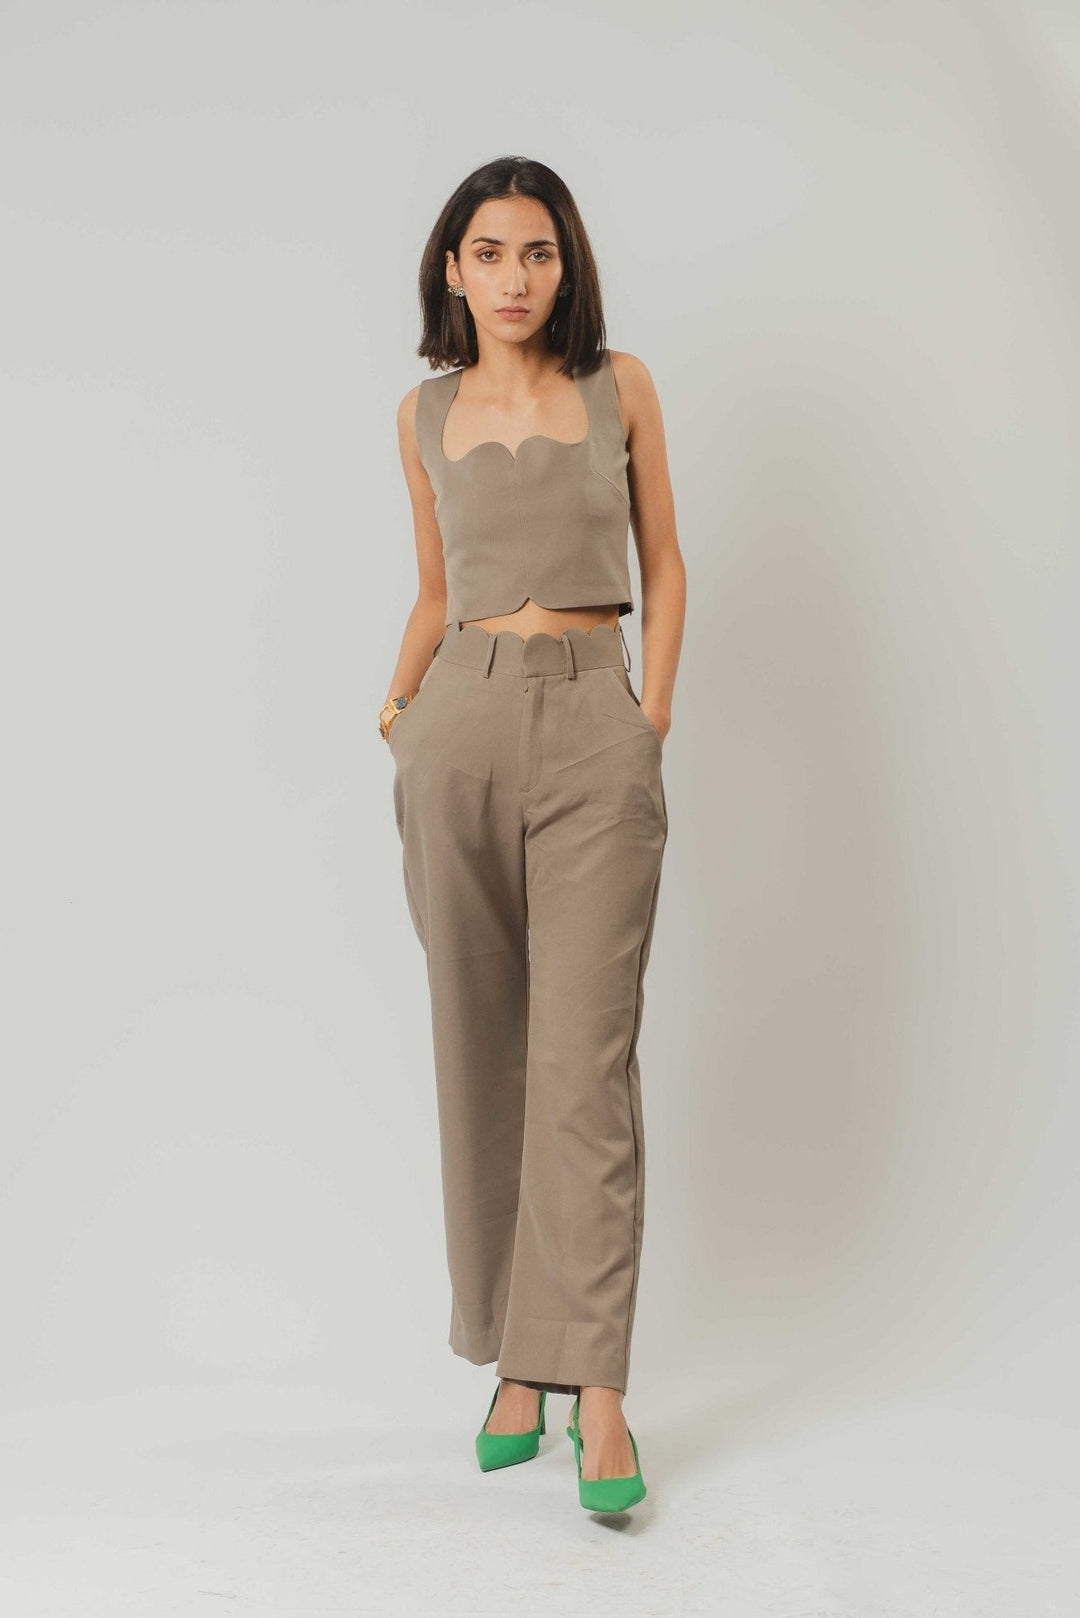 CC Crop Top and Scallop Trousers Coord Set